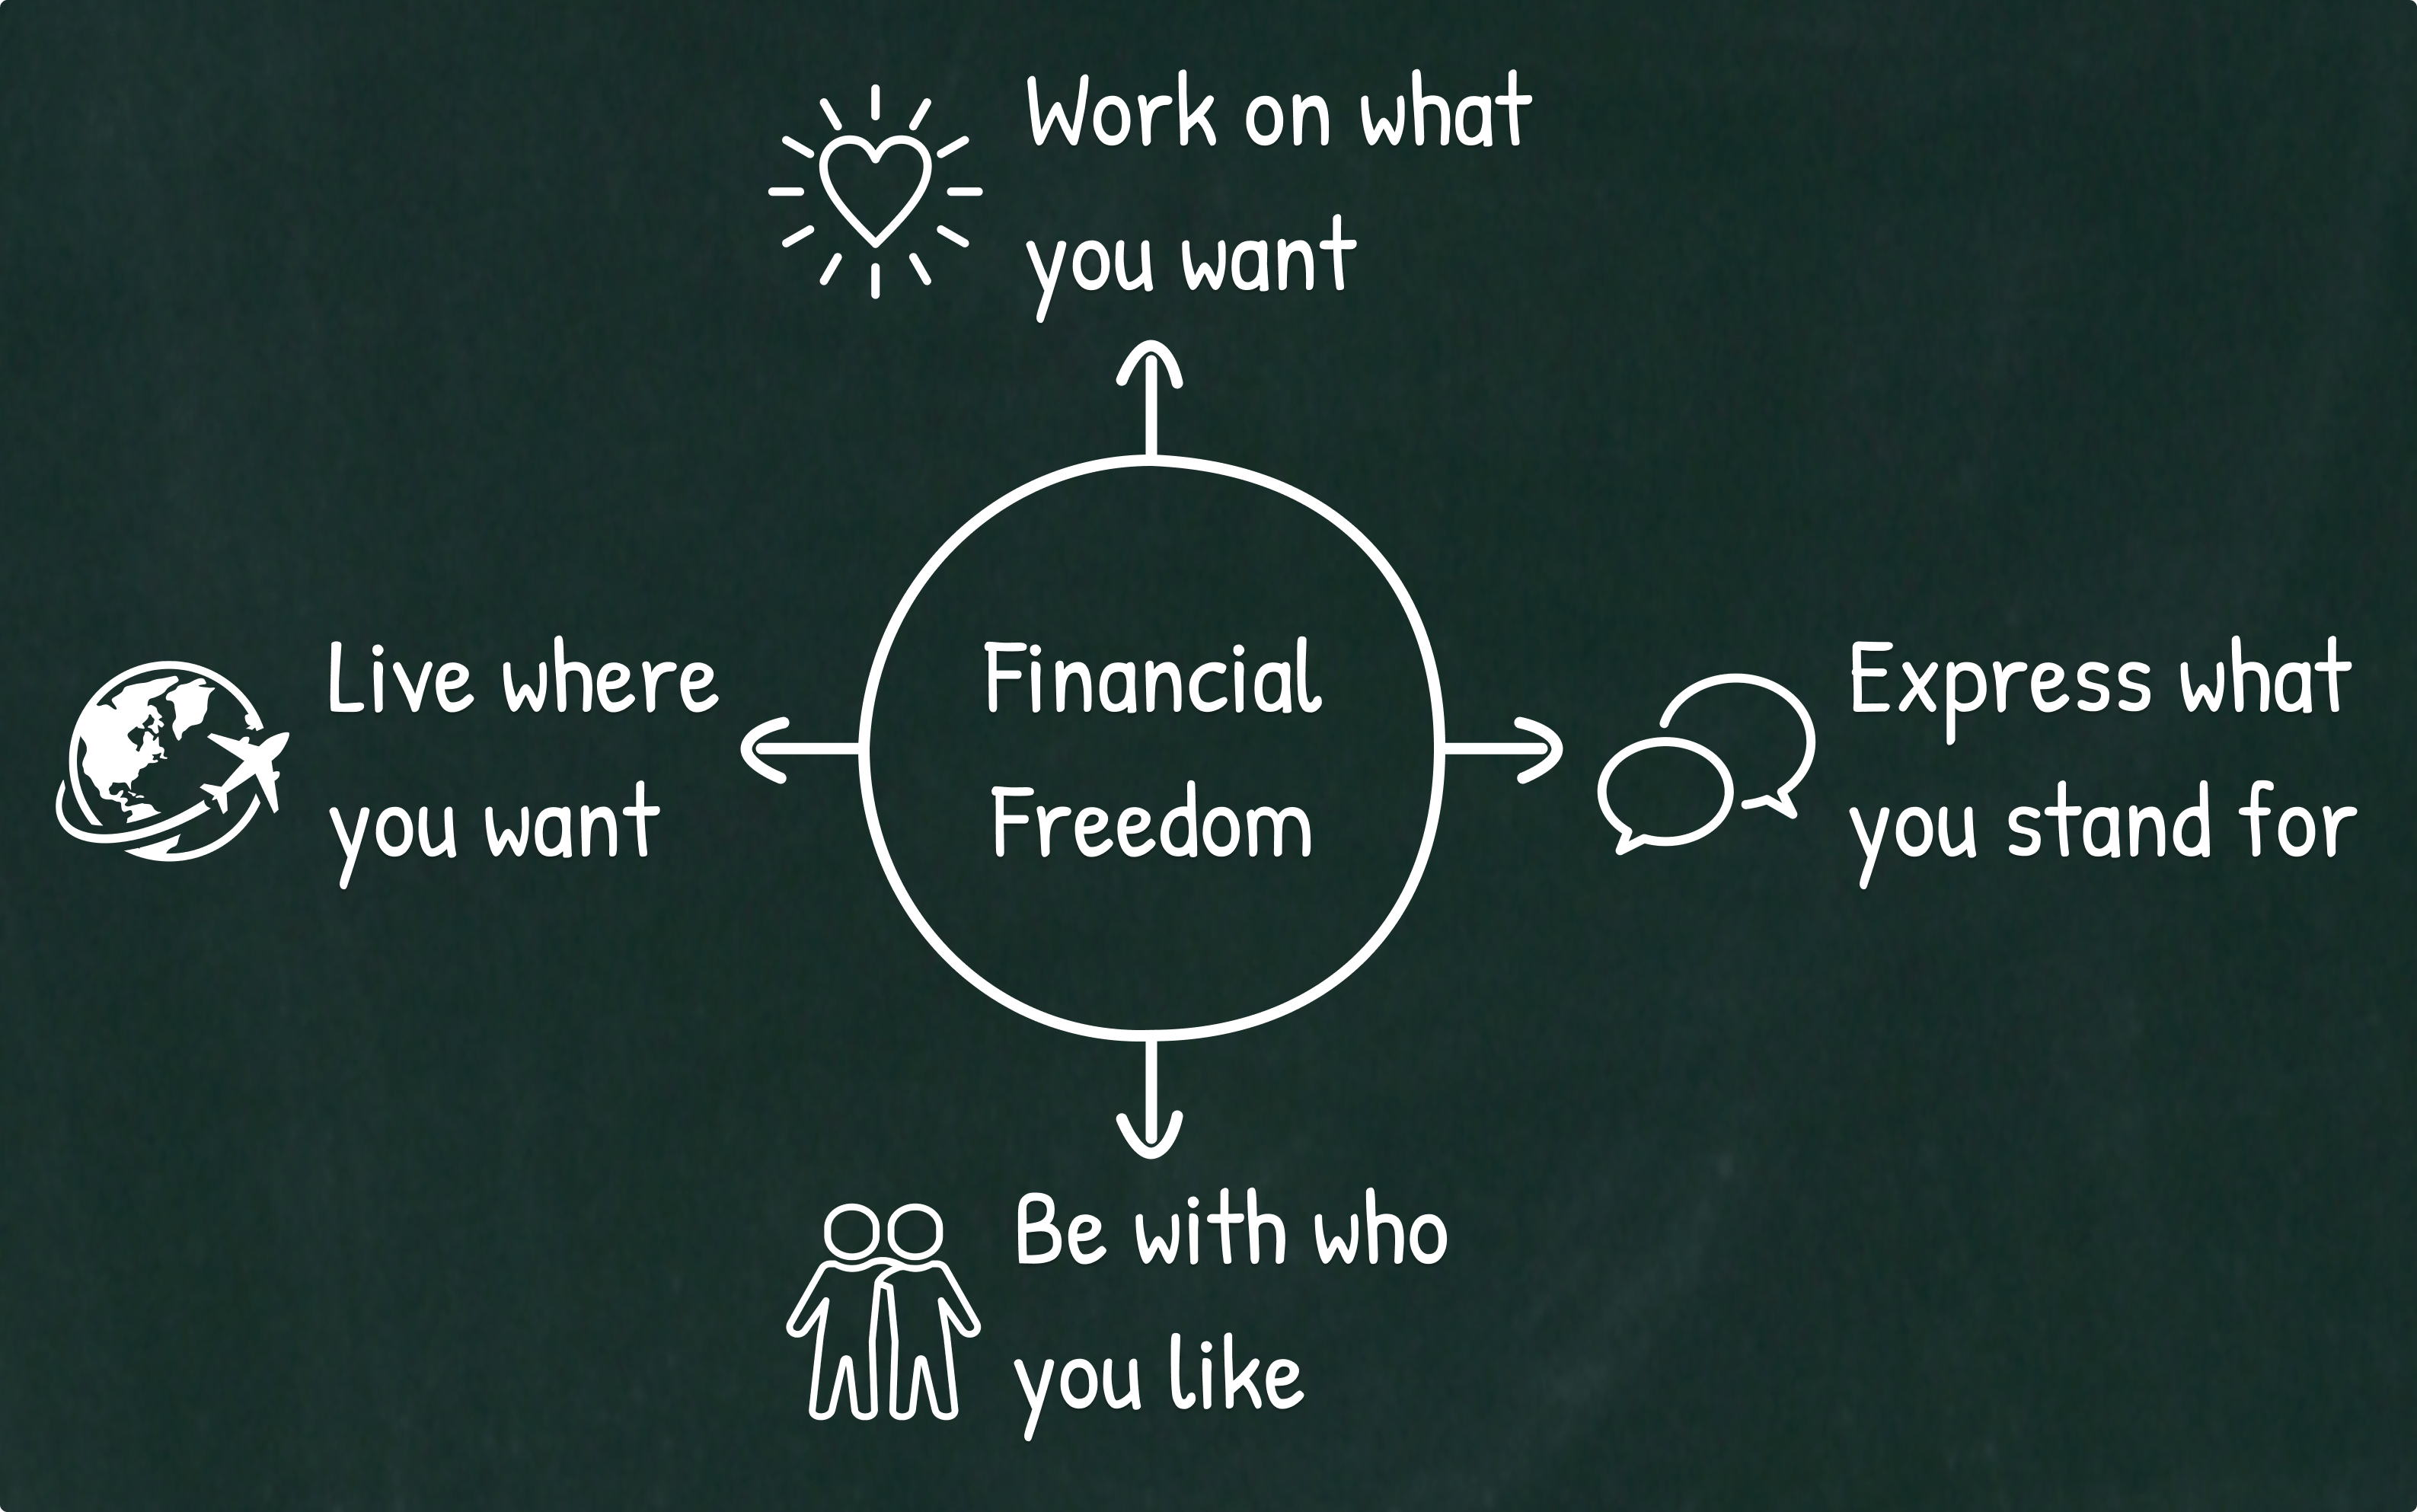 Illustration of how Financial Freedom can give you Personal Sovereignty